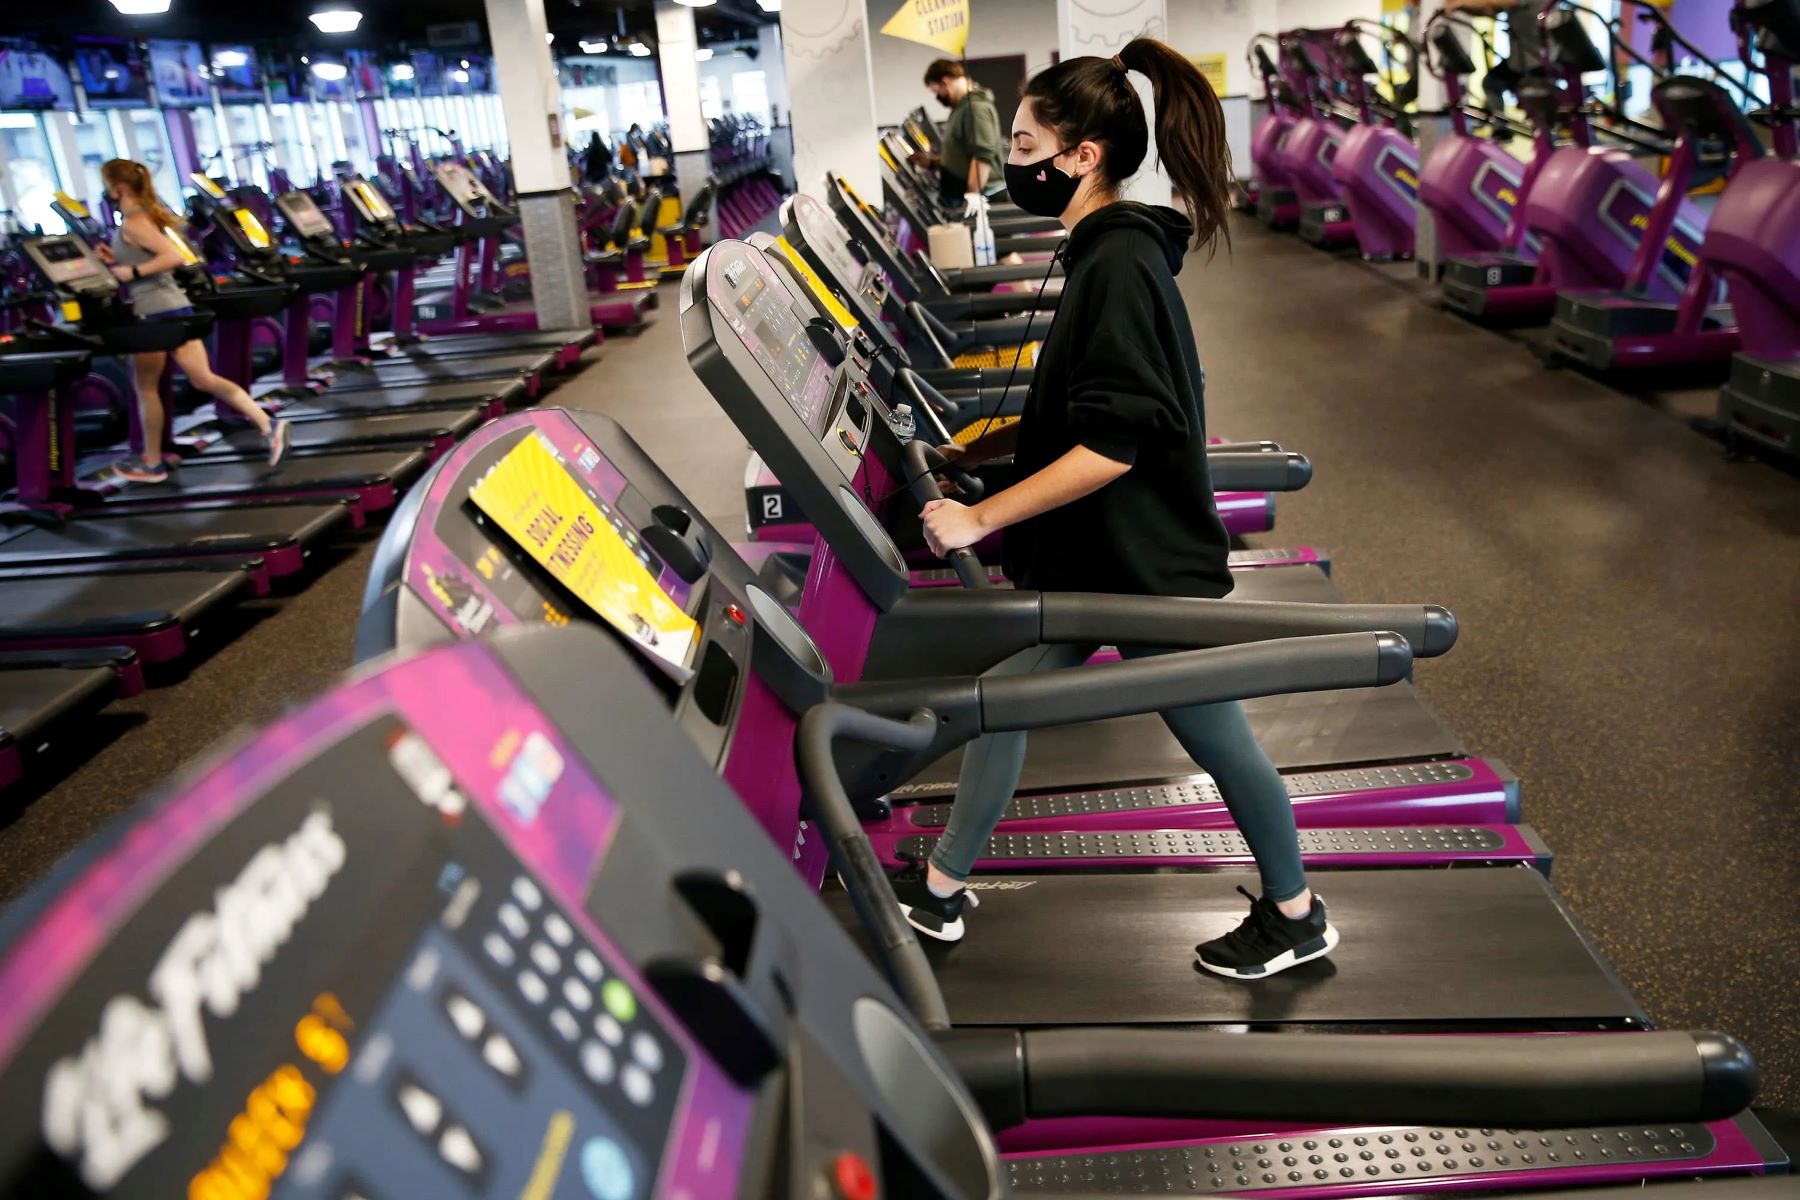 How To Use A Treadmill At Planet Fitness